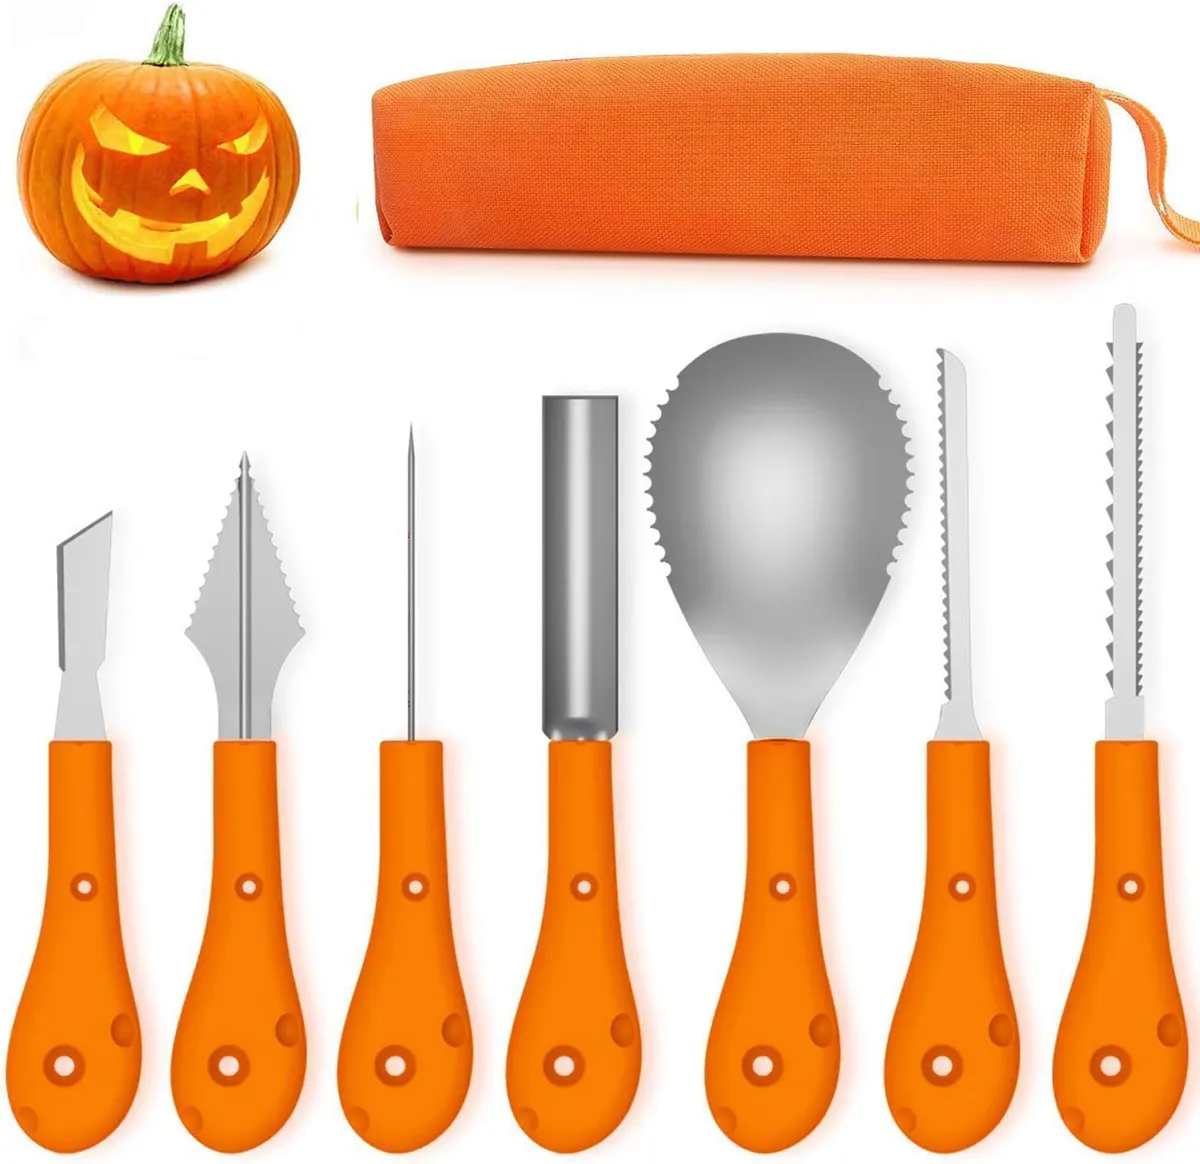 Halloween Pumpkin Carving Kit Tools, 23Pcs Professional Heavy Duty  Stainless Steel Carving Set for Pumpkin Jack-o-Lanterns, Pumpkin Carving  Set with